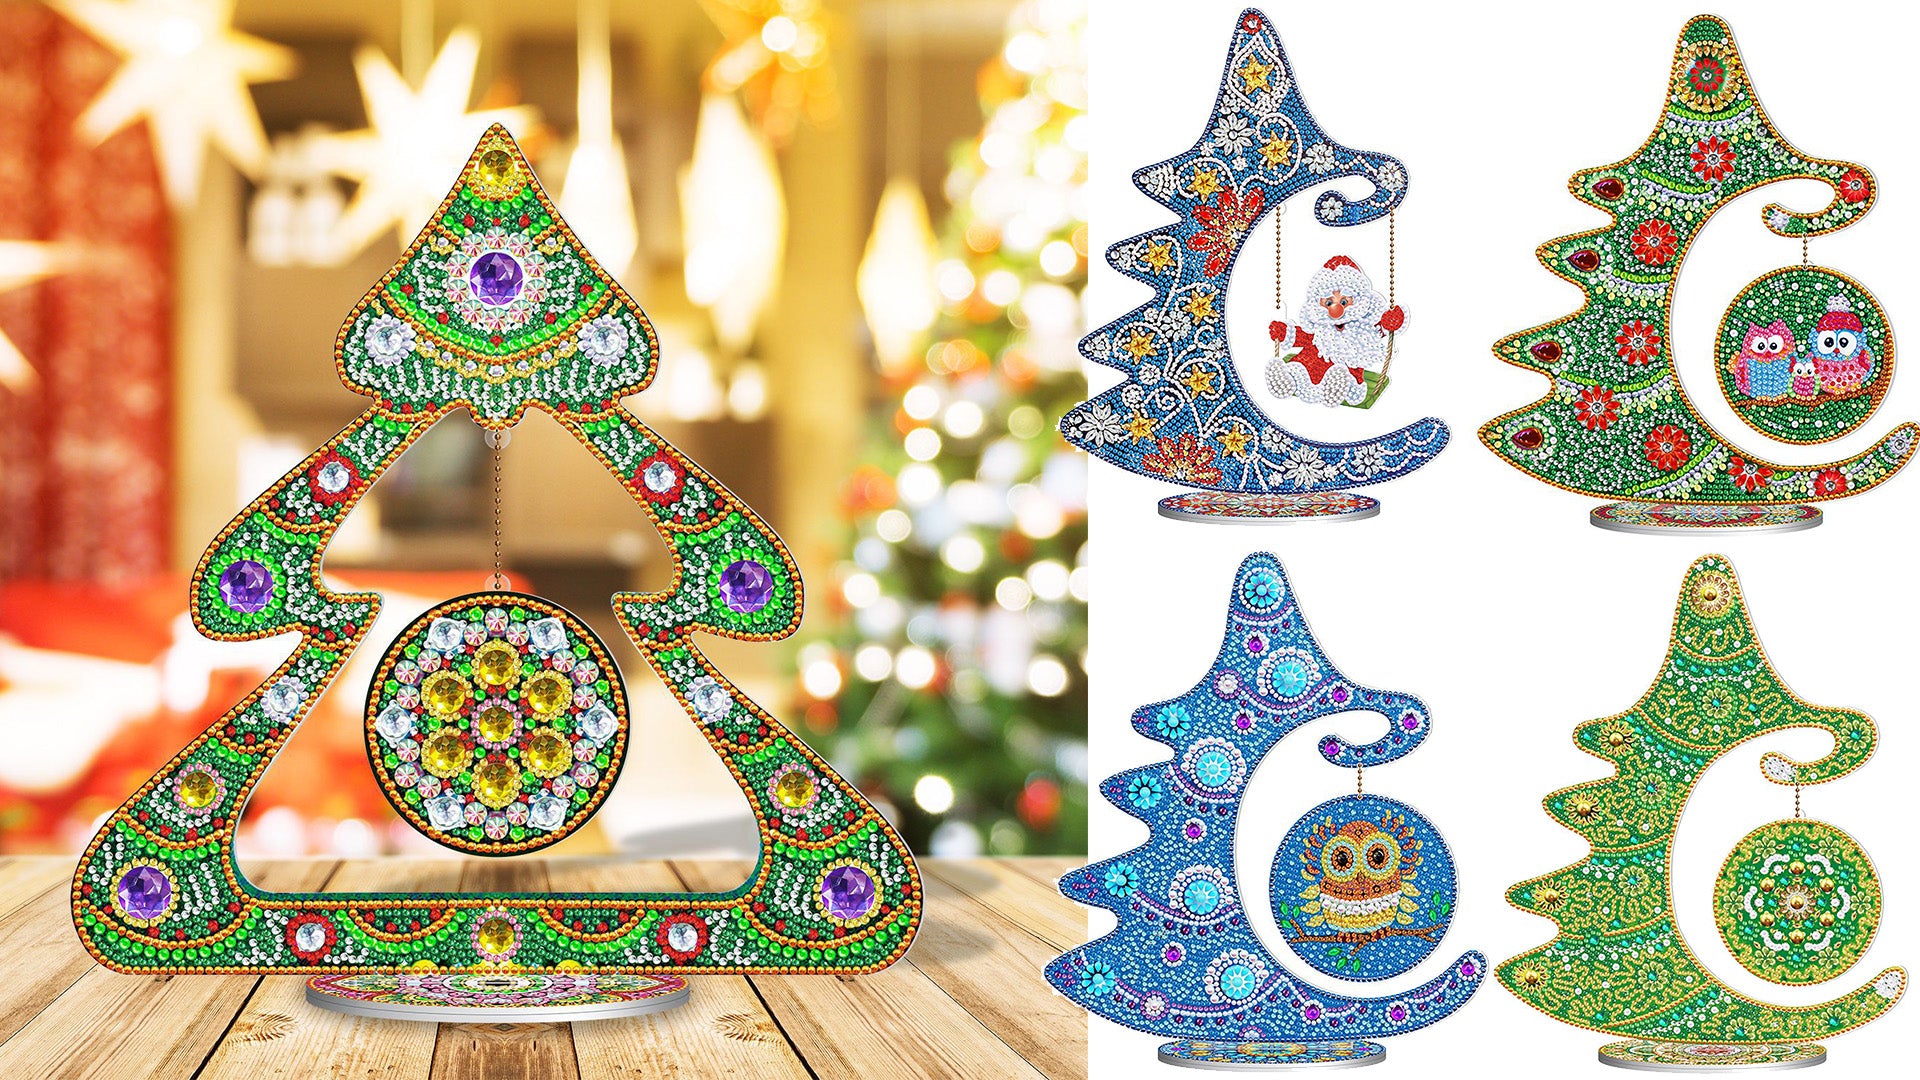 10pcs/set DIY Christmas Diamond Painting Ornaments Only Without Tray Wood  Material Crystal Rhinestones Christmas Ornaments With Holders For Table